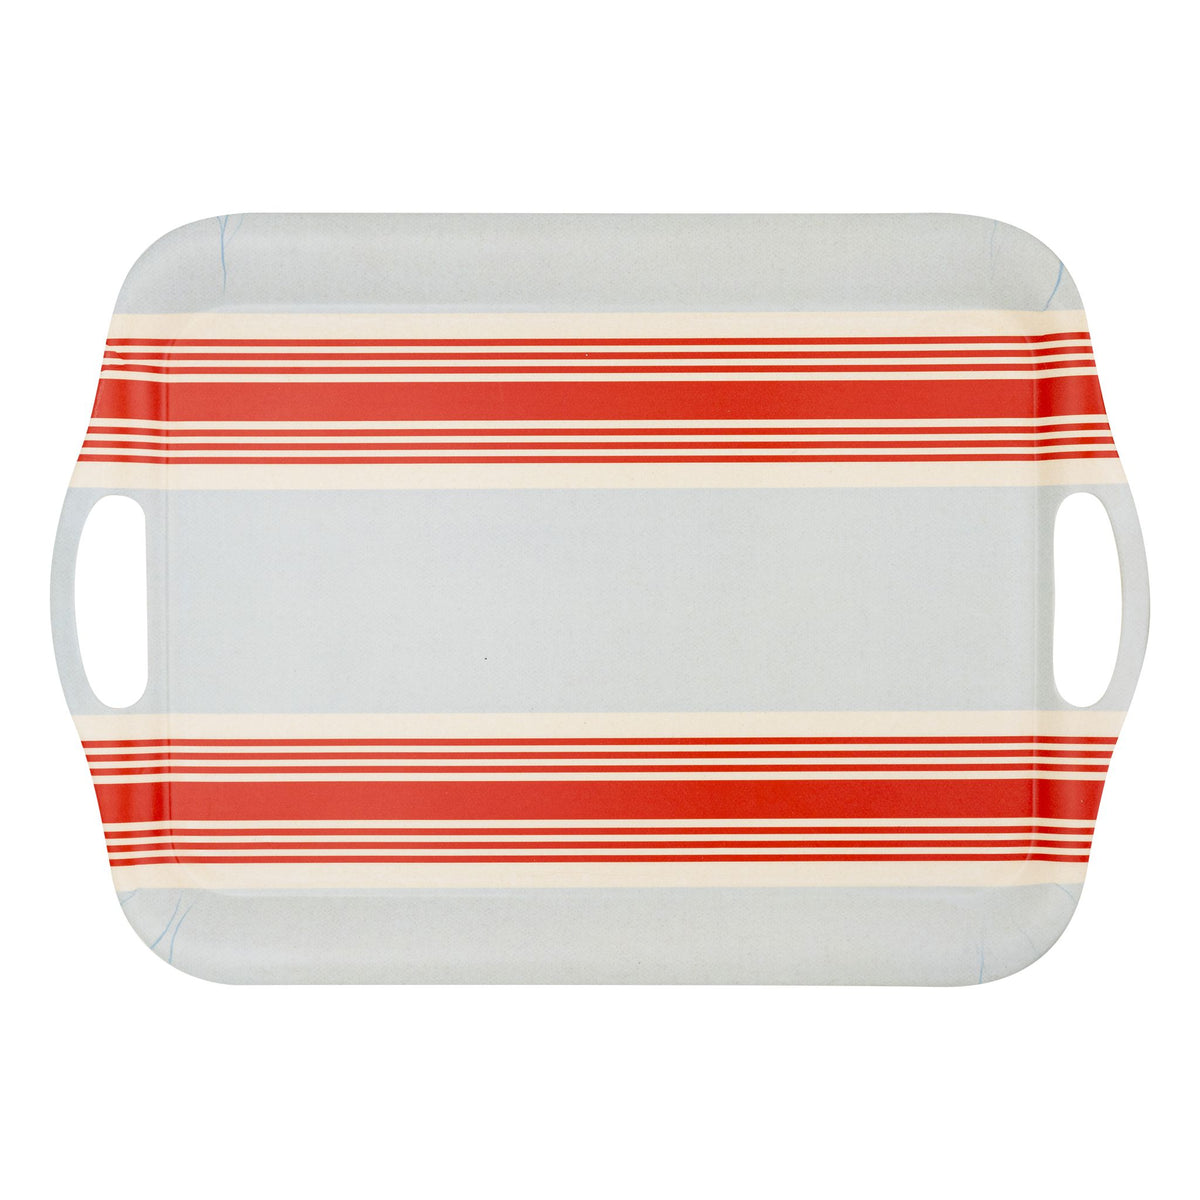 Hamptons Striped Chambray and Red Reusable Bamboo Tray - The Preppy Bunny